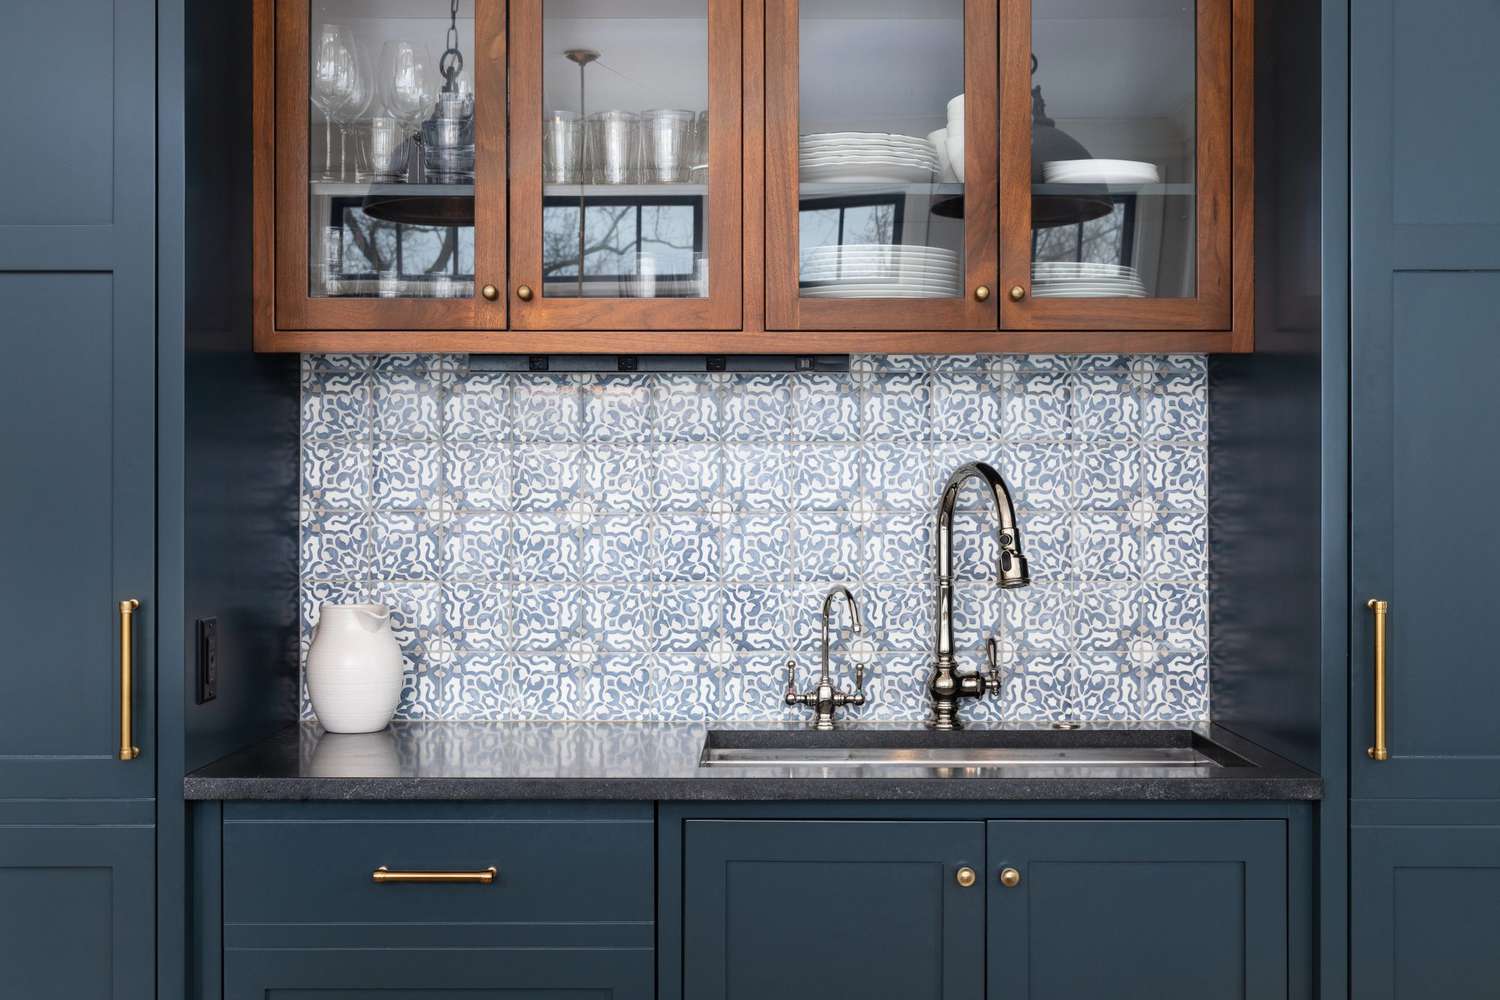 6 Kitchen Paint Trends to Consider in 2023